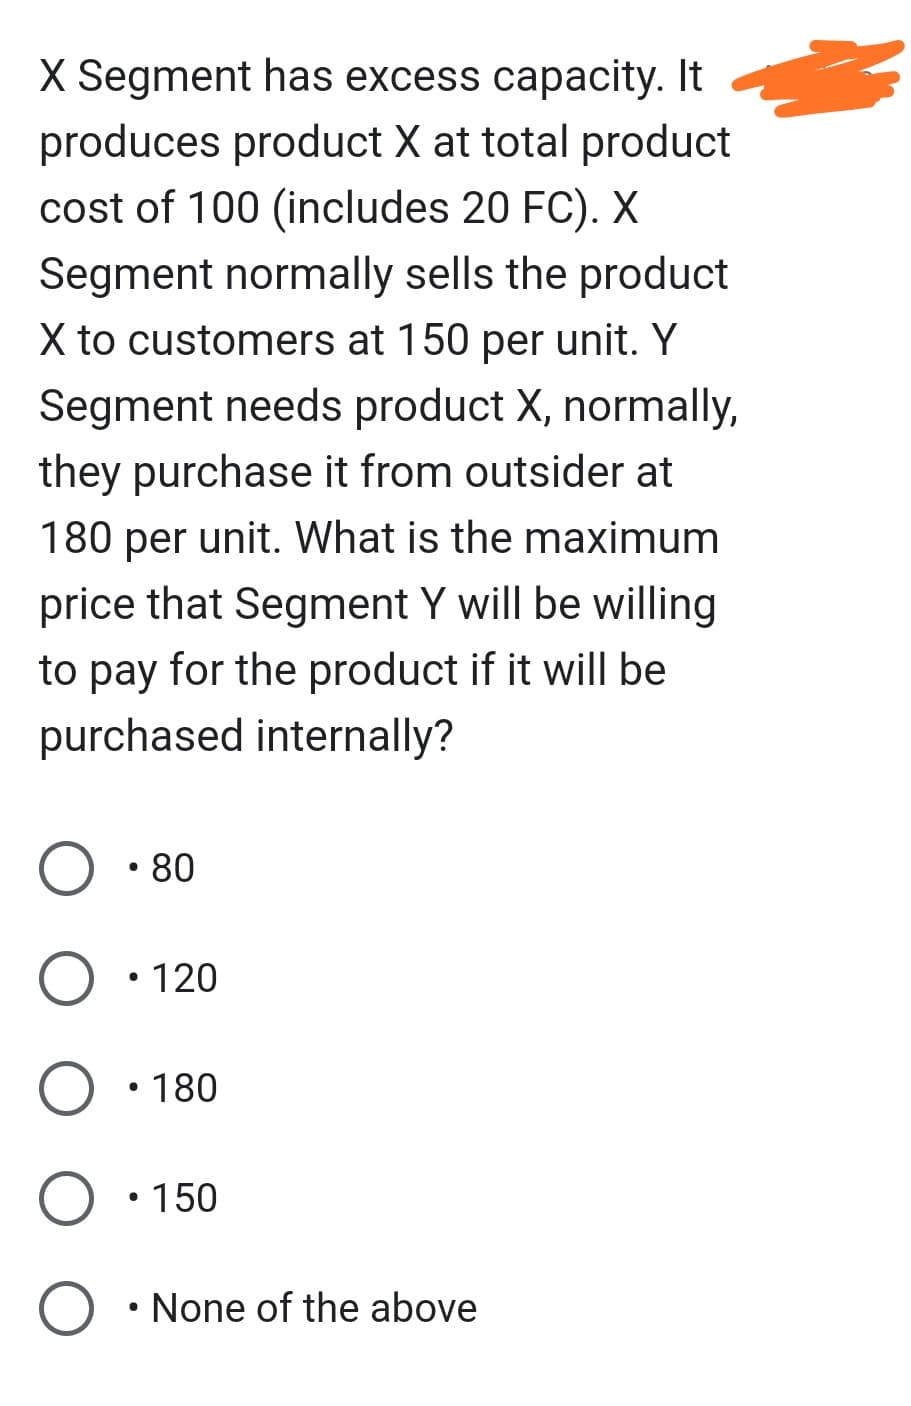 X Segment has excess capacity. It
produces product X at total product
cost of 100 (includes 20 FC). X
Segment normally sells the product
X to customers at 150 per unit. Y
Segment needs product X, normally,
they purchase it from outsider at
180 per unit. What is the maximum
price that Segment Y will be willing
to pay for the product if it will be
purchased internally?
●
• 80
O • 120
• 180
• 150
O • None of the above